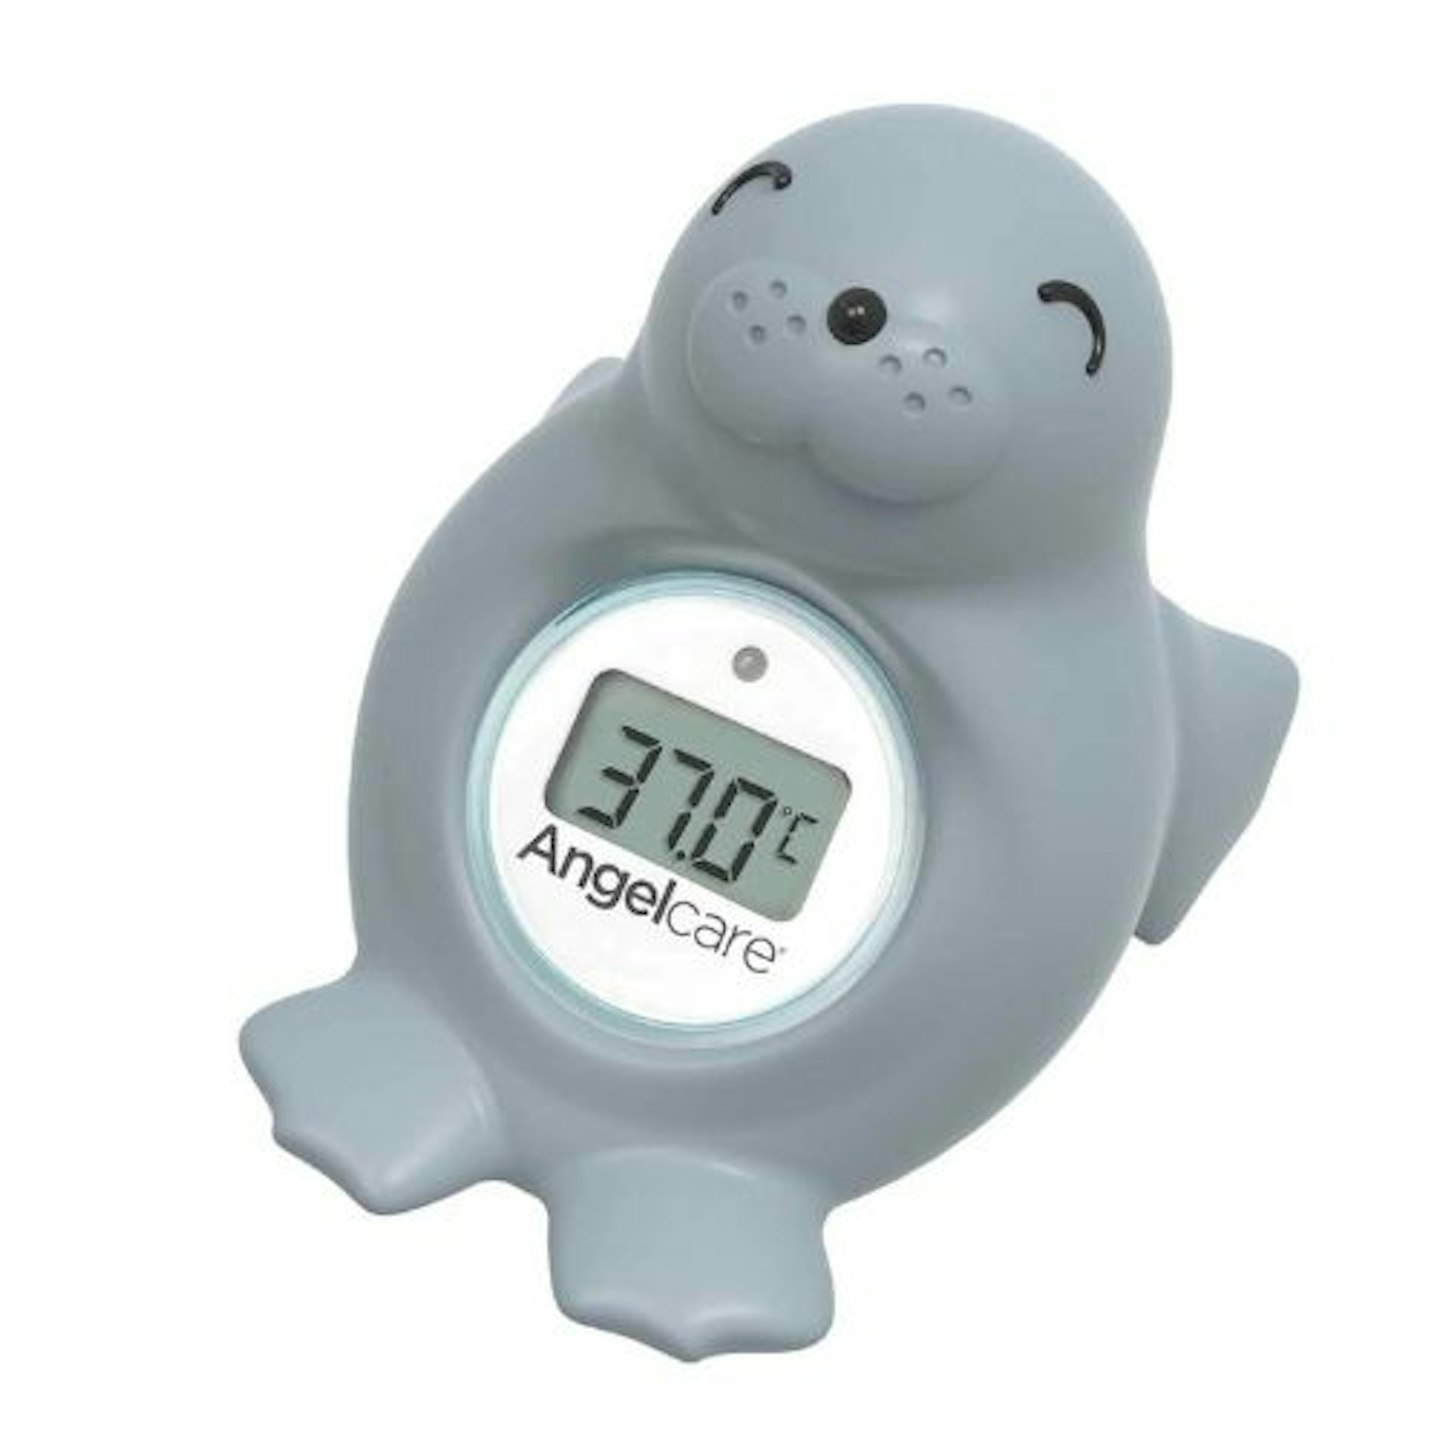 Safety 30seconds recommended nursery thermometer 📌Removable